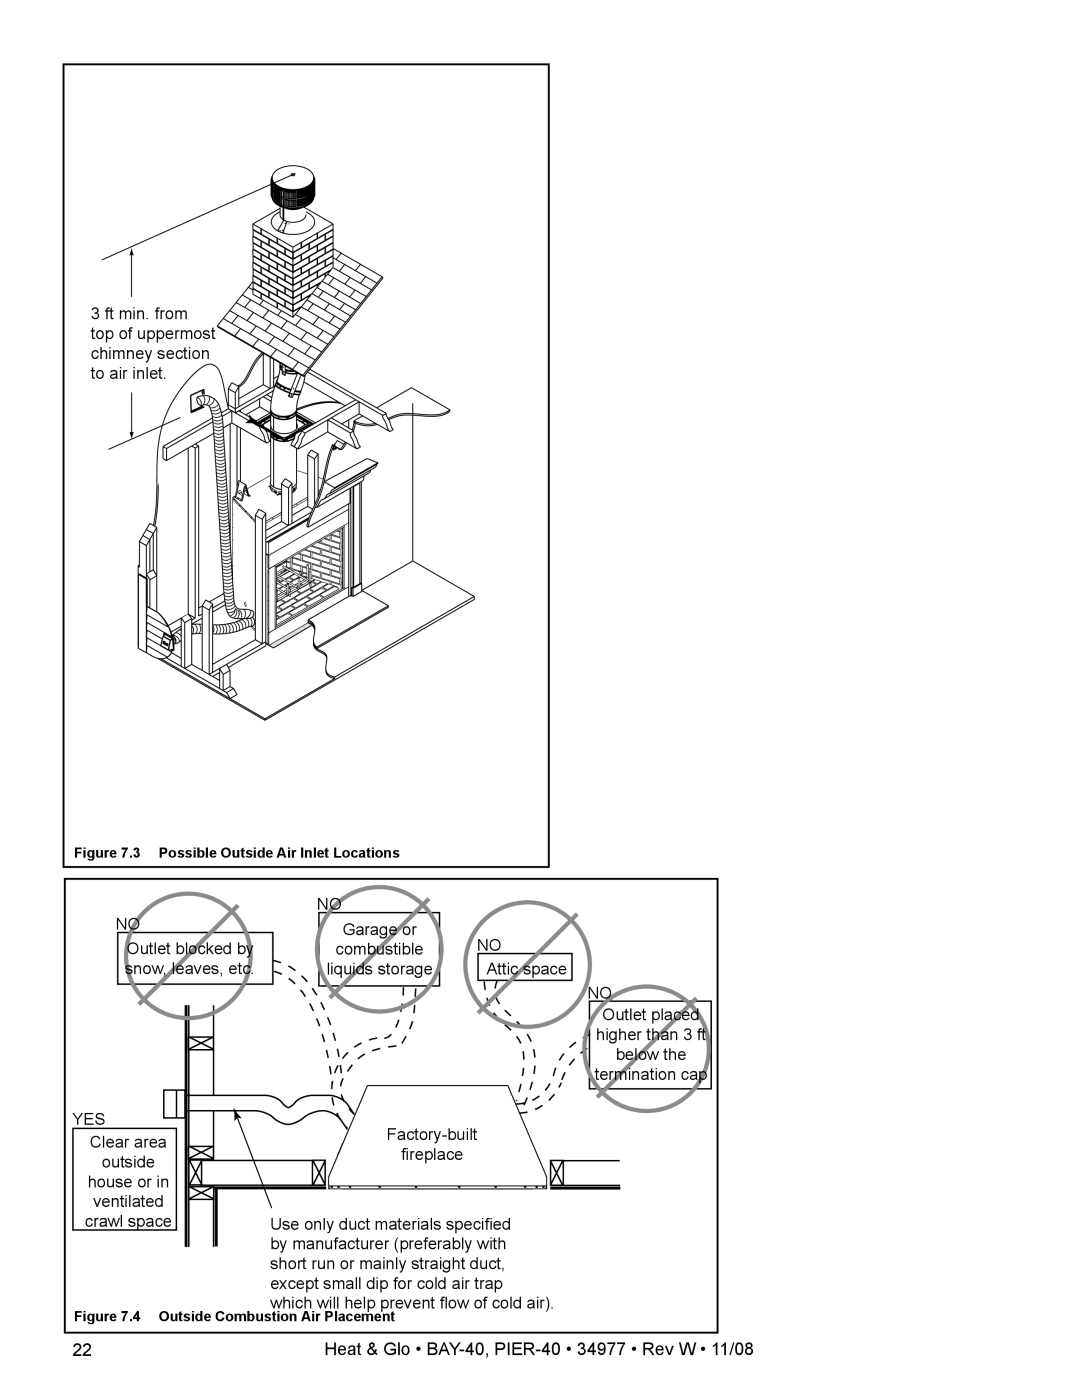 Hearth and Home Technologies BAY-40, PIER-40 owner manual Ft min. from top of uppermost chimney section to air inlet 